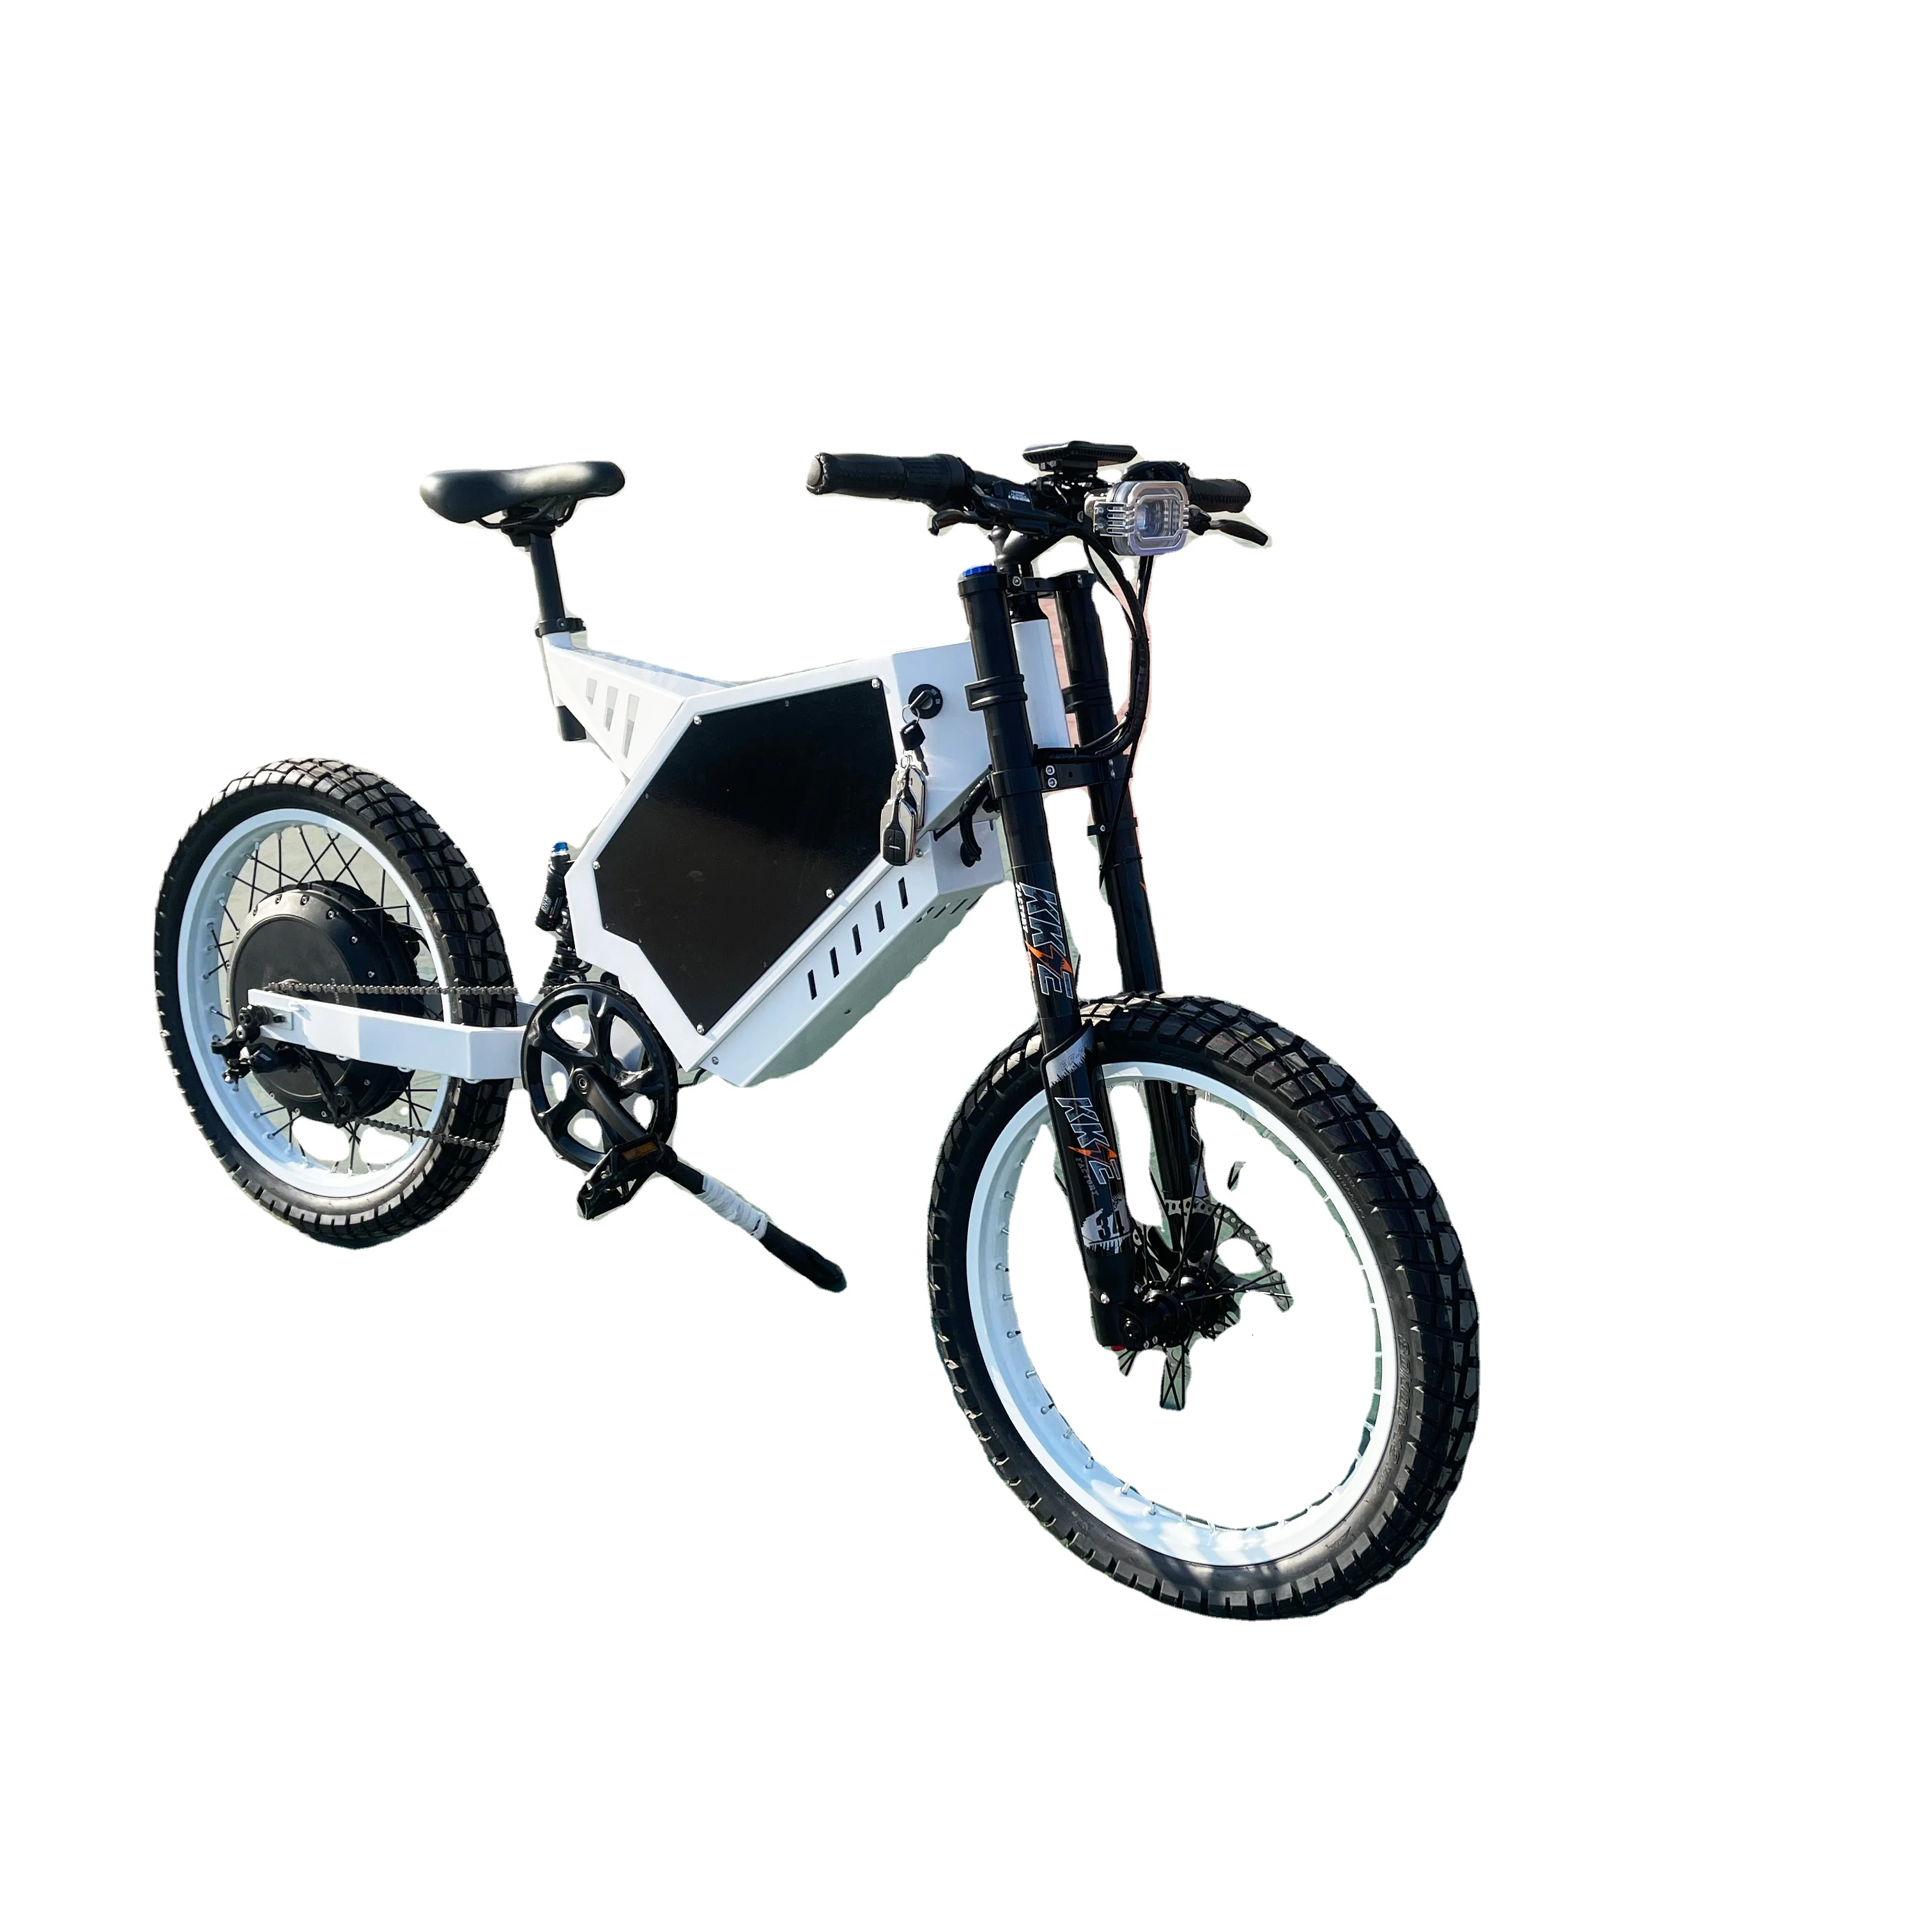 Bedachtzaam Clancy elke keer Ce En15194 Price S Bomber 5000w Cheap Euro 72v Black Electric Road City Star  E Bike - Buy E-bike,Electric Road Bike,Stealth Bomber Product on Alibaba.com